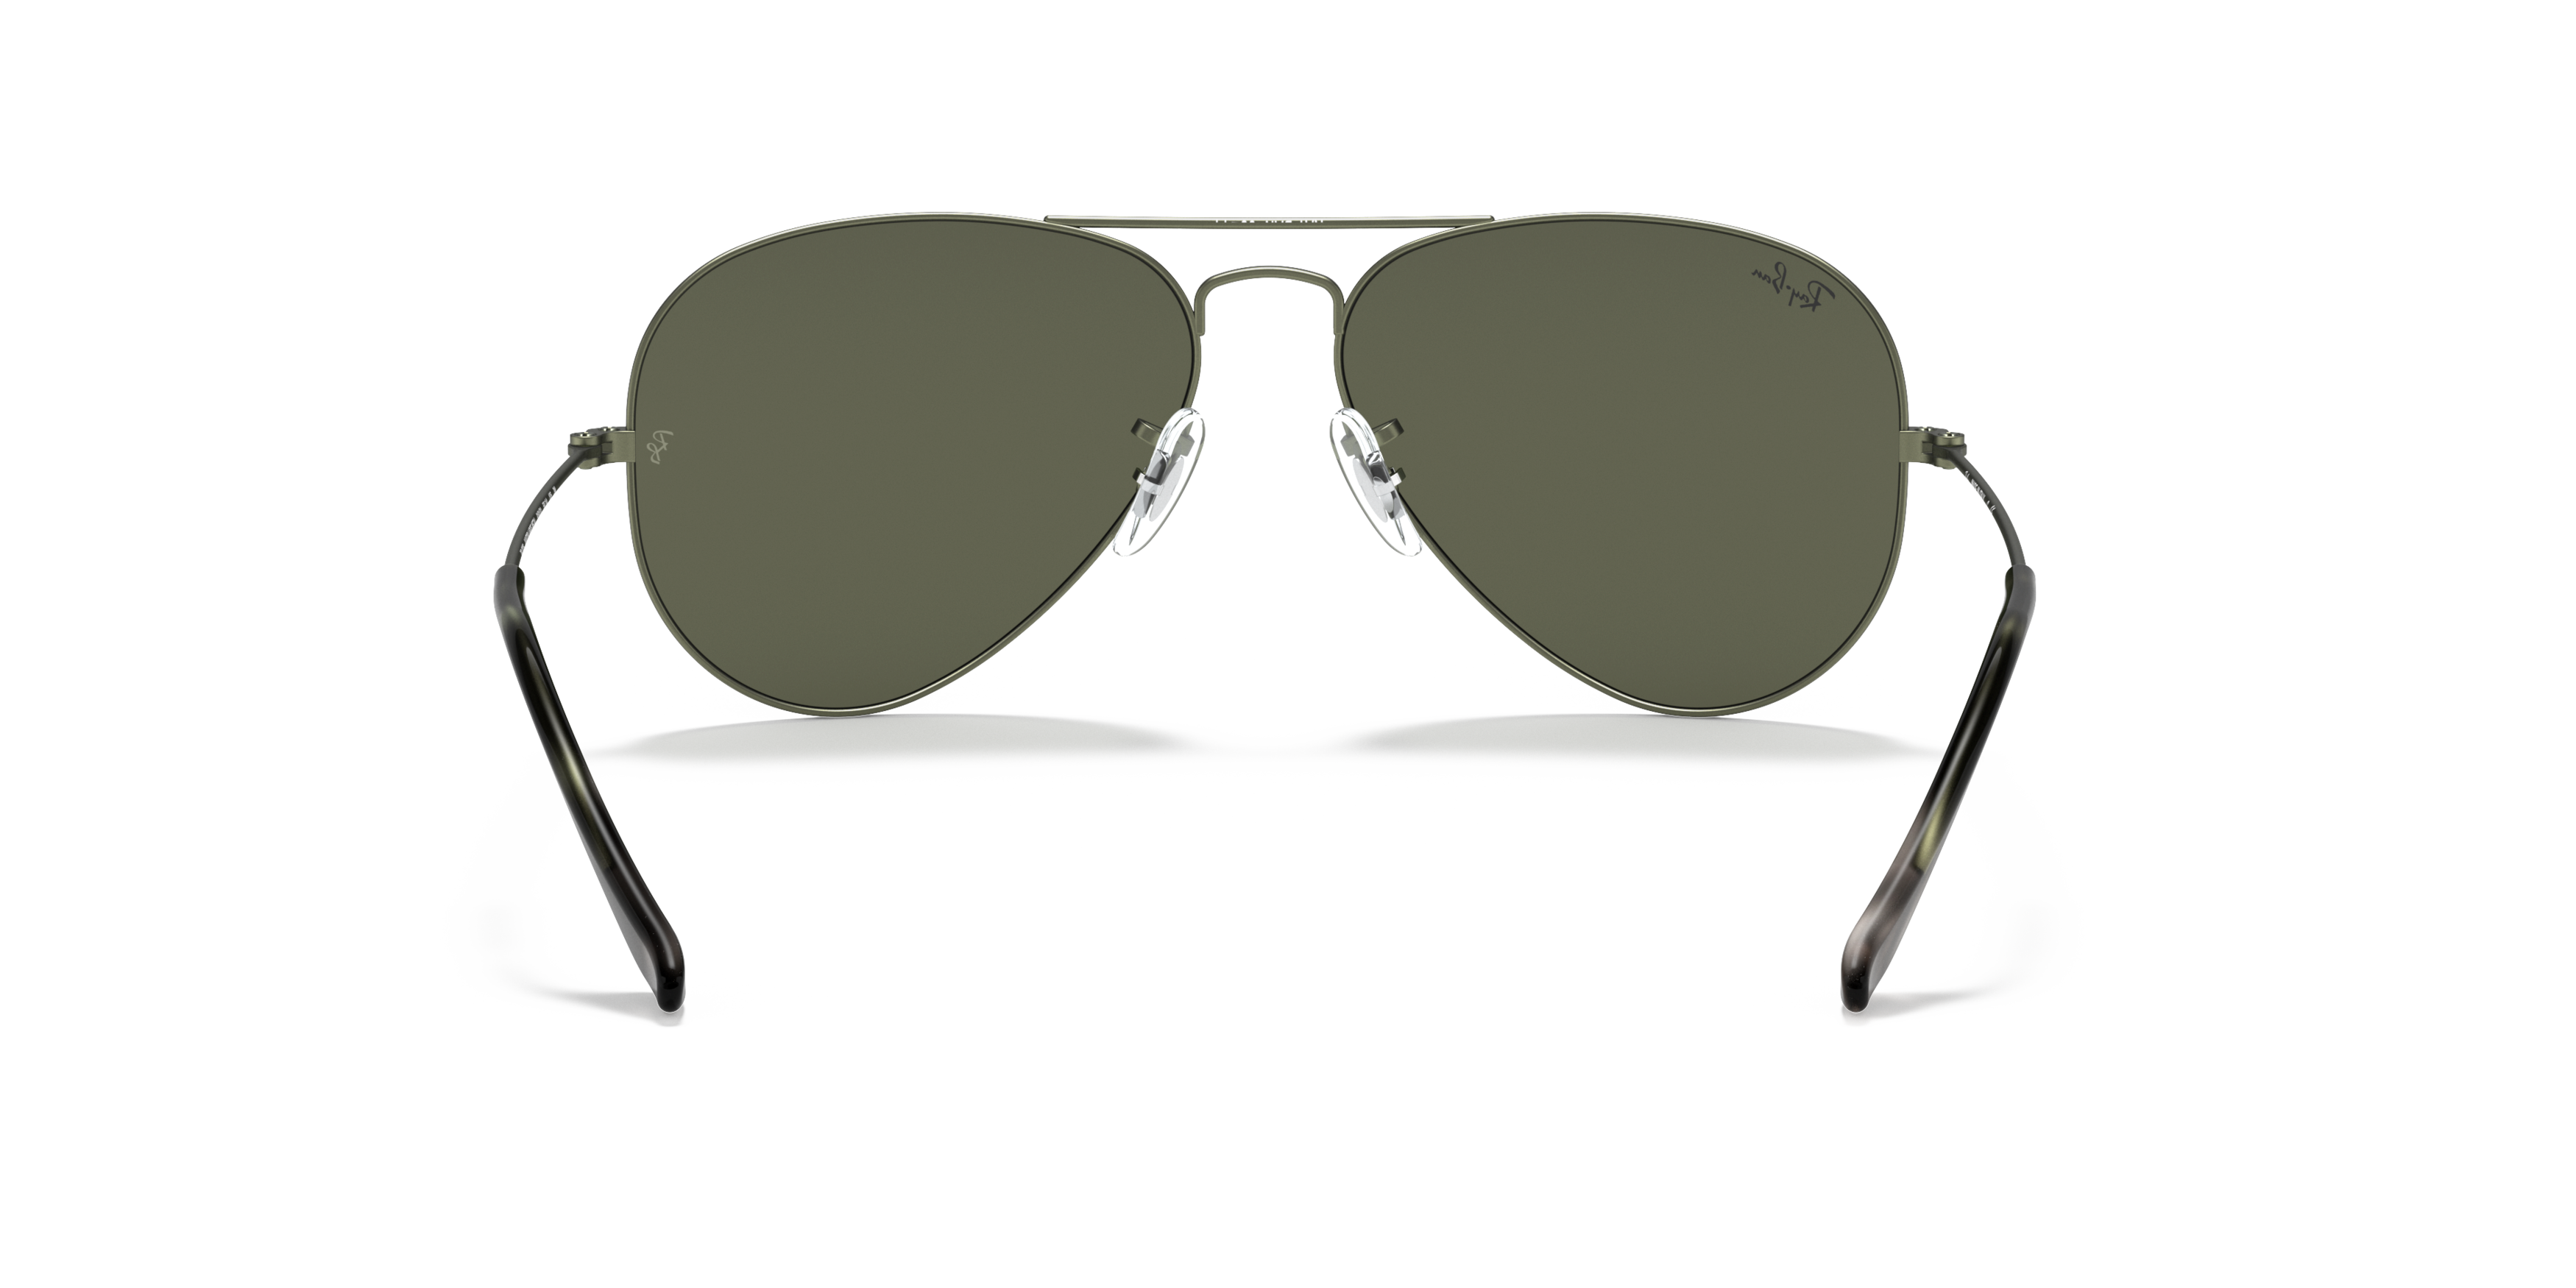 [products.image.detail02] Ray-Ban Aviator Classic RB3025 919131